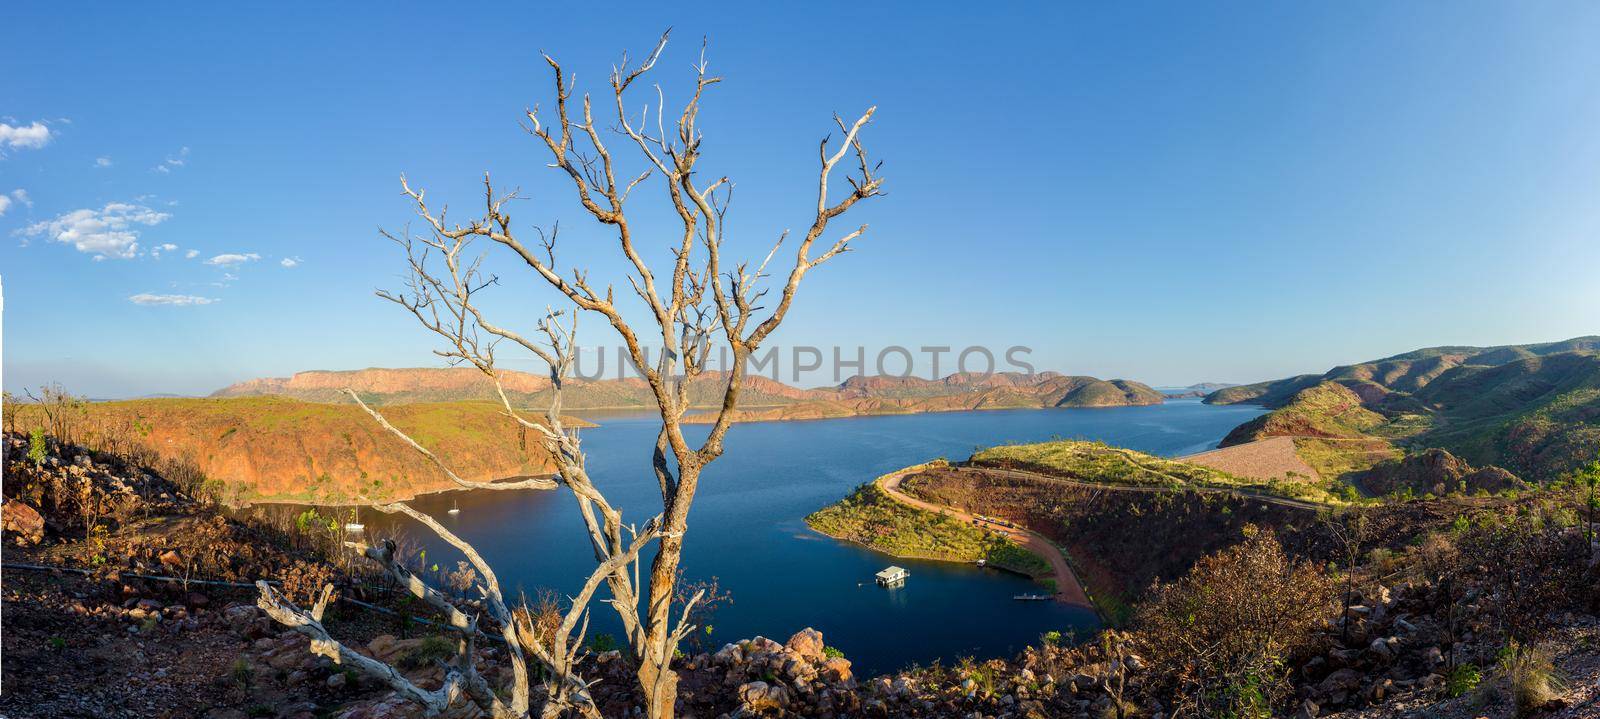 dead tree in front of Lake Argyle is Western Australia's largest man-made reservoir by volume. near the East Kimberley town of Ku by bettercallcurry